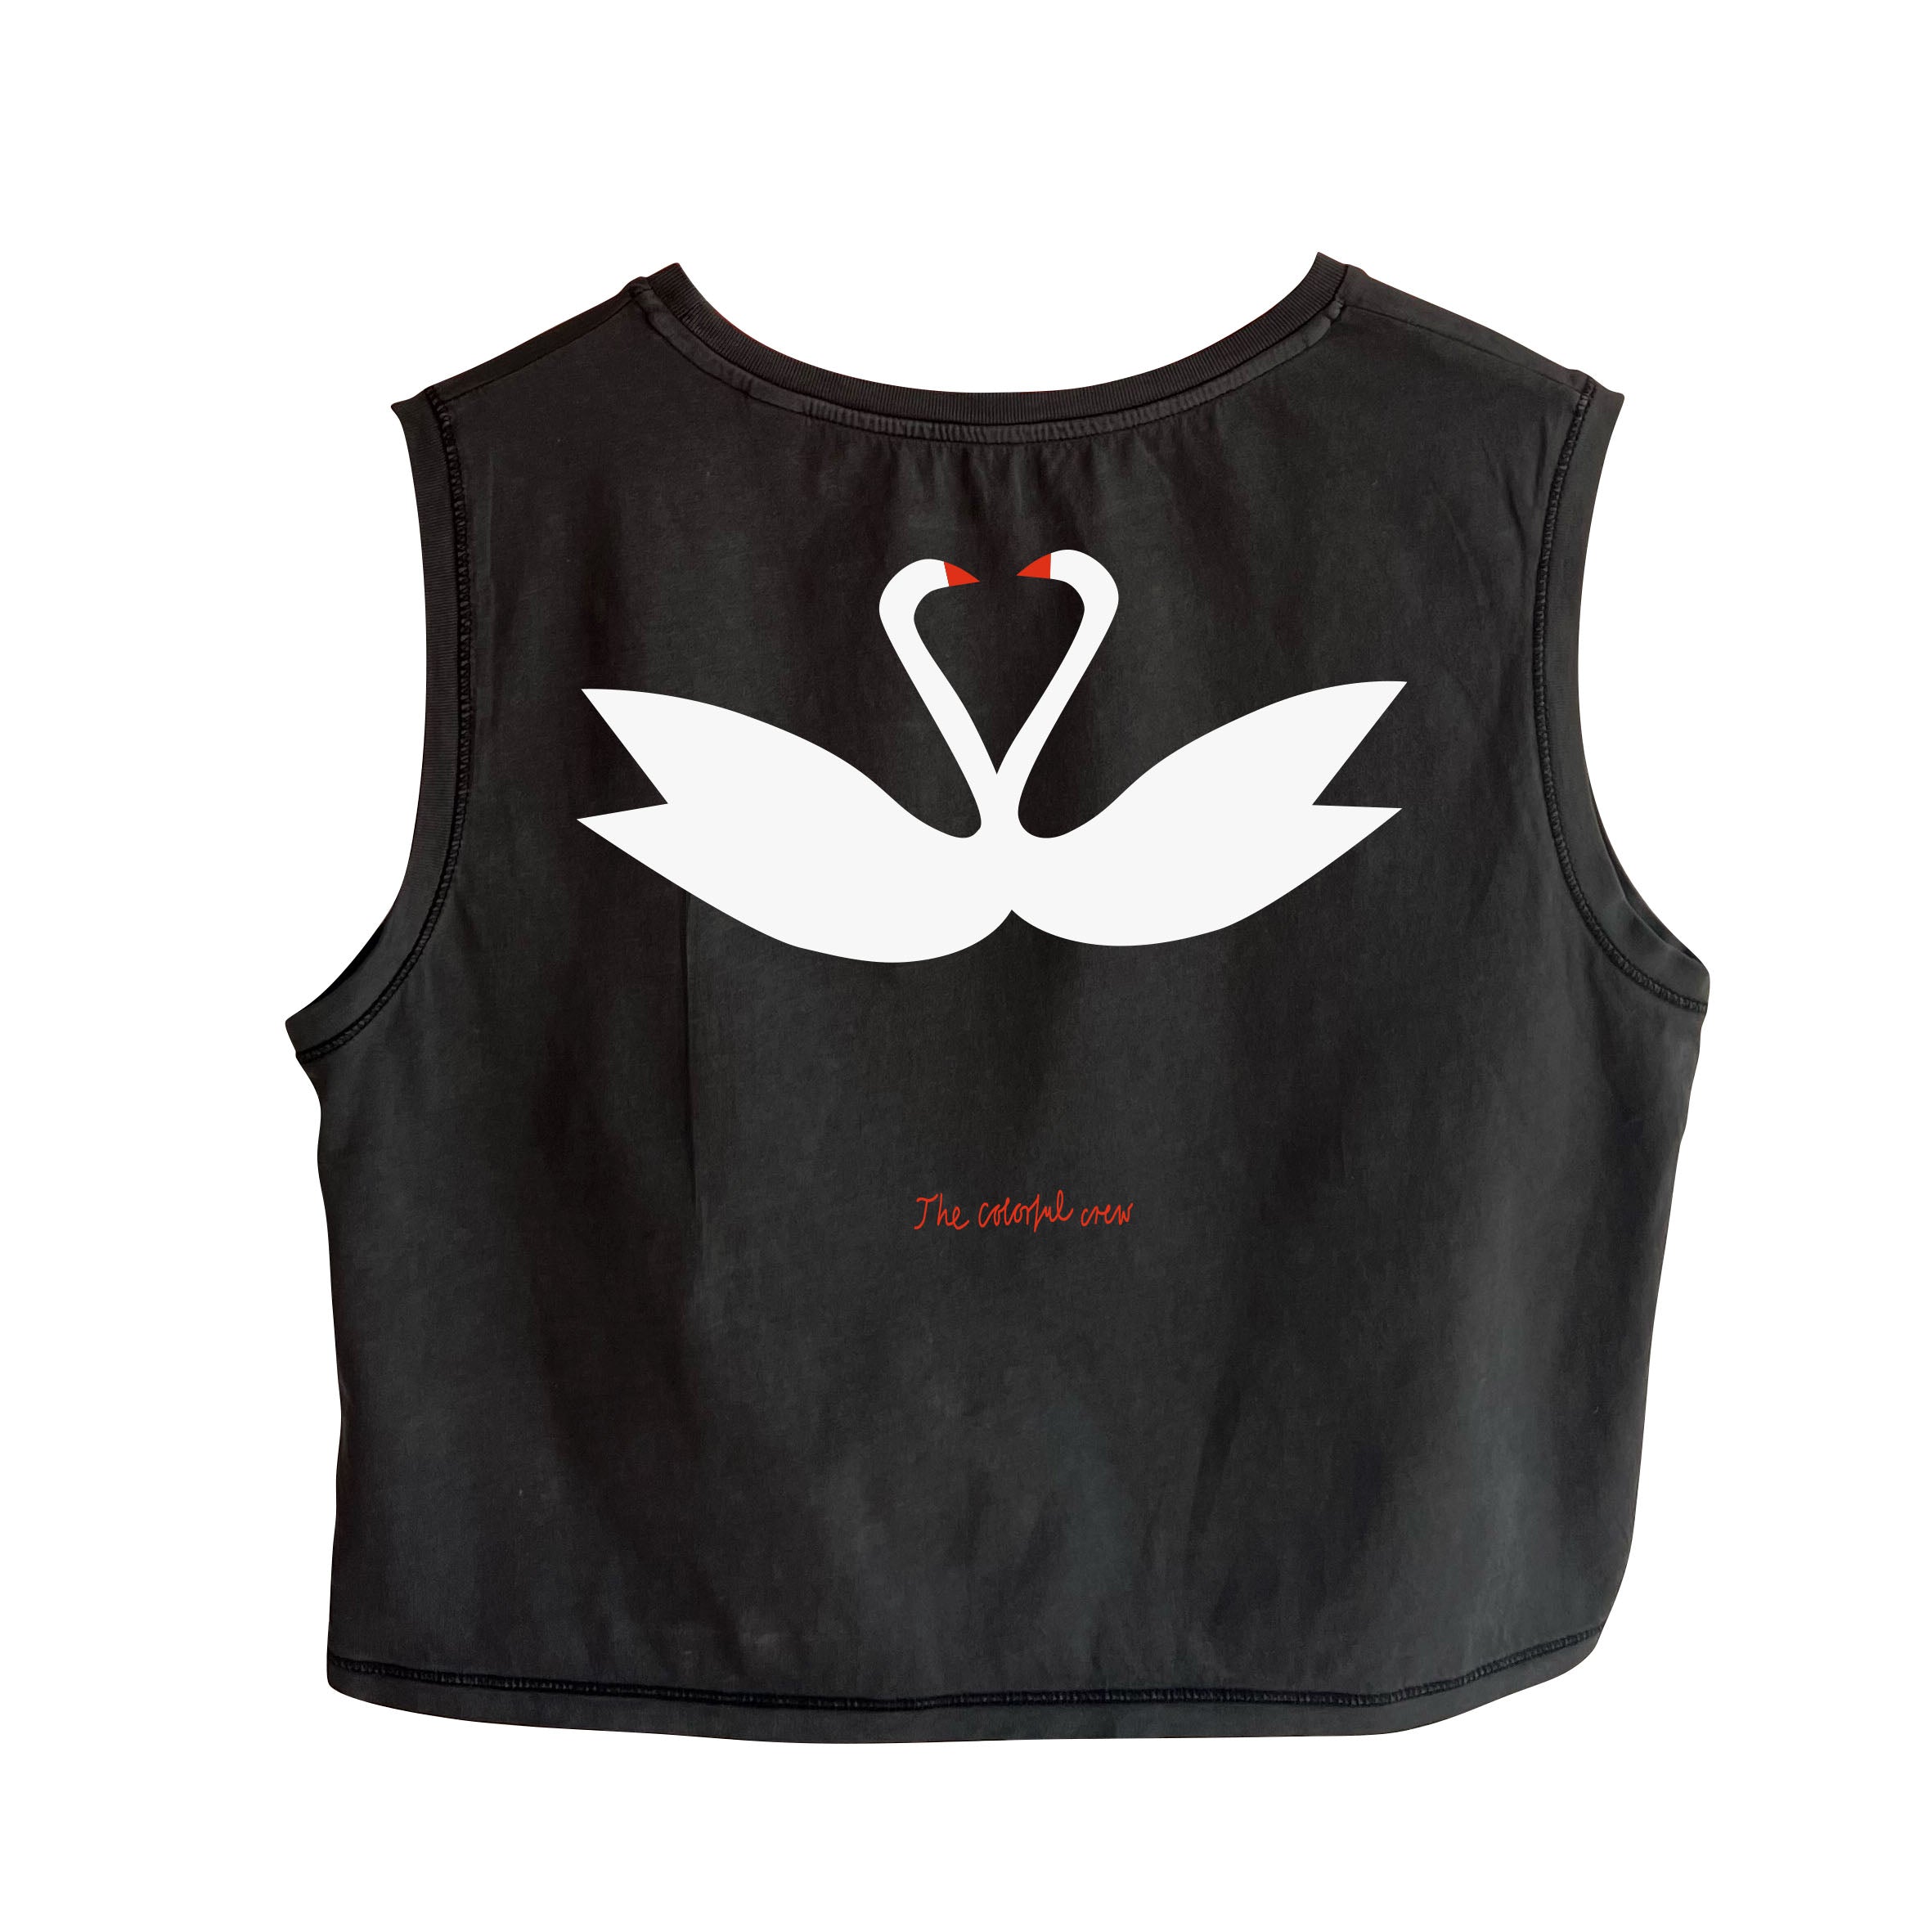 BRANDNEW // ON CONNECTION Yoga Tank Top // dyed black